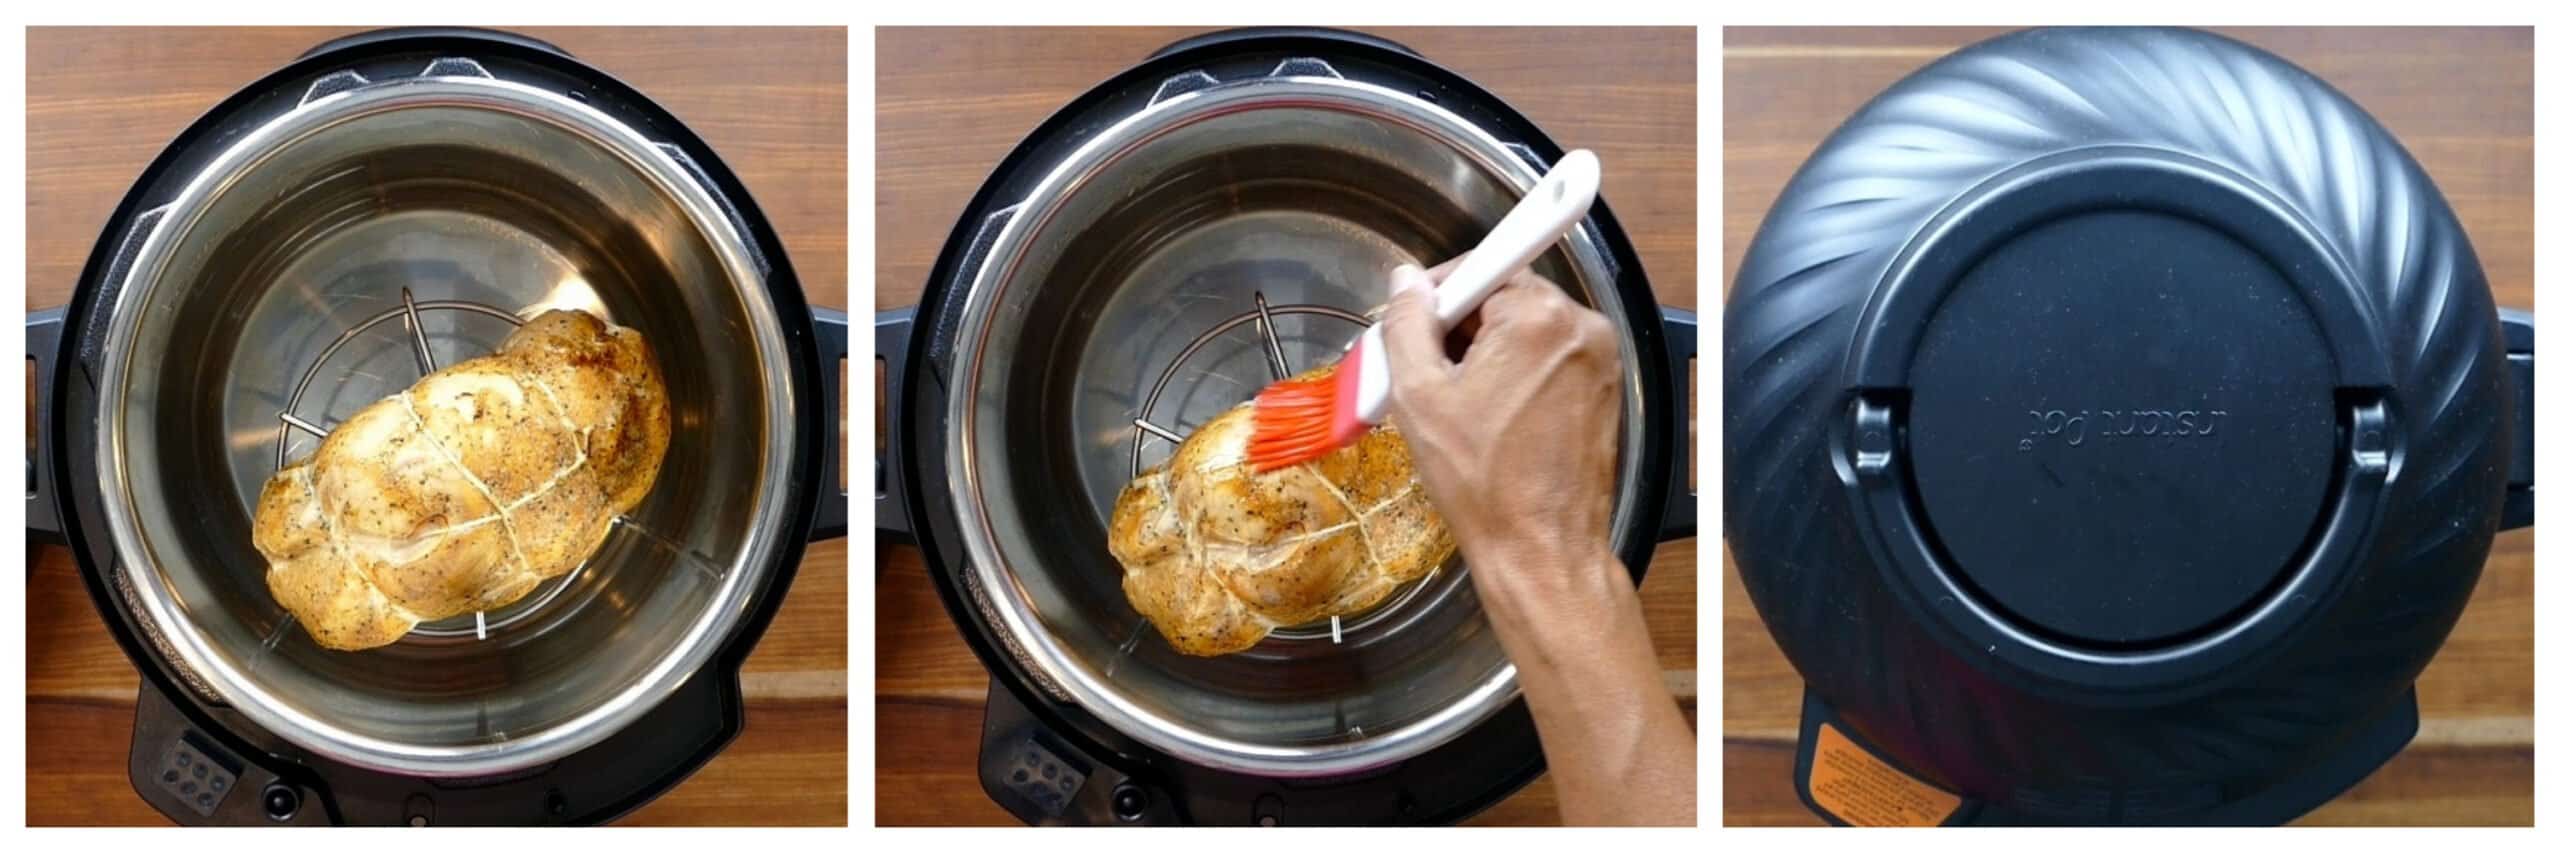 Instant Pot Sous Vide Turkey Breast Instructions collage - golden brown turkey, baste with oil. lid on